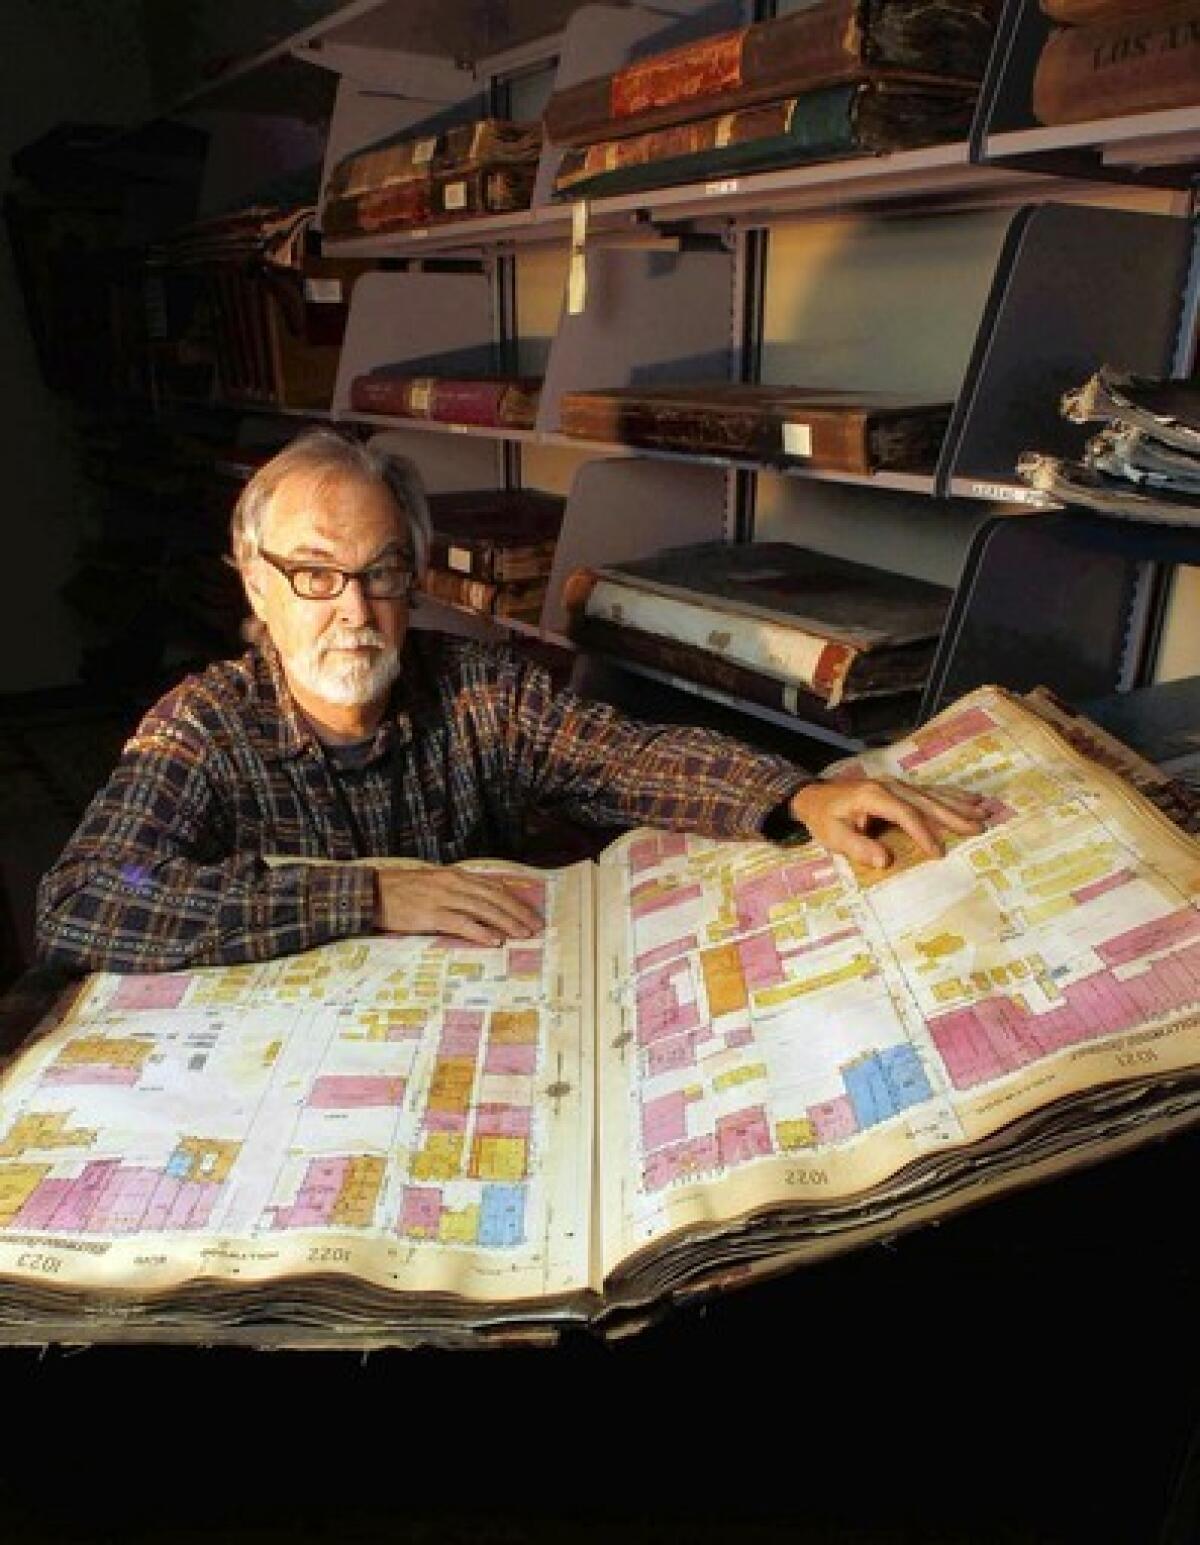 Glen Creason, map librarian at the Los Angeles Central Library, pulls out one of the large, heavy volumes of Sanborn maps — detailed drawings of each block of the city prepared for insurance purposes that are troves of information about old Los Angeles.